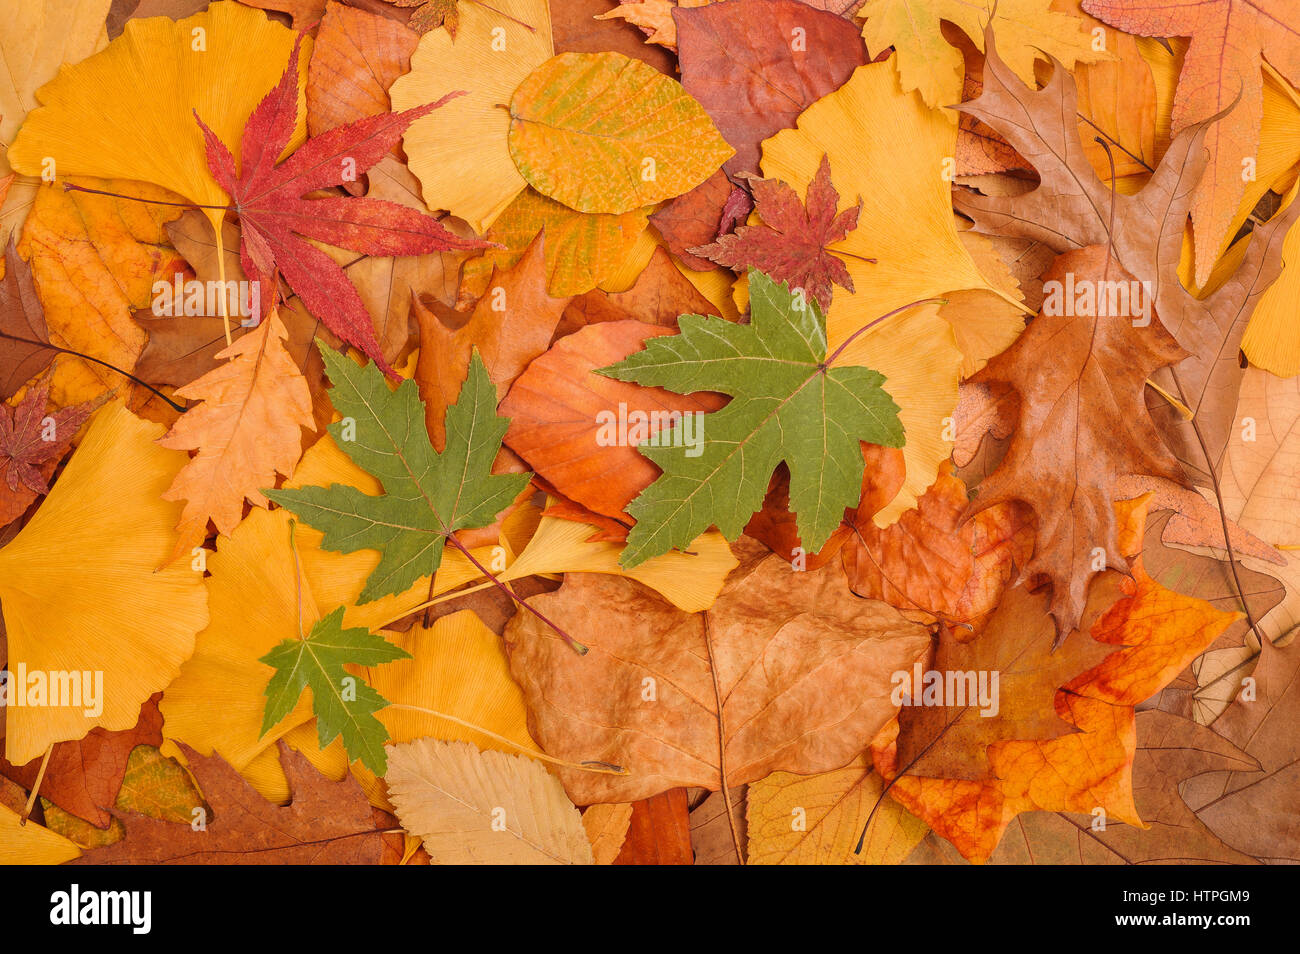 background made of fallen dried autumn leaves Stock Photo